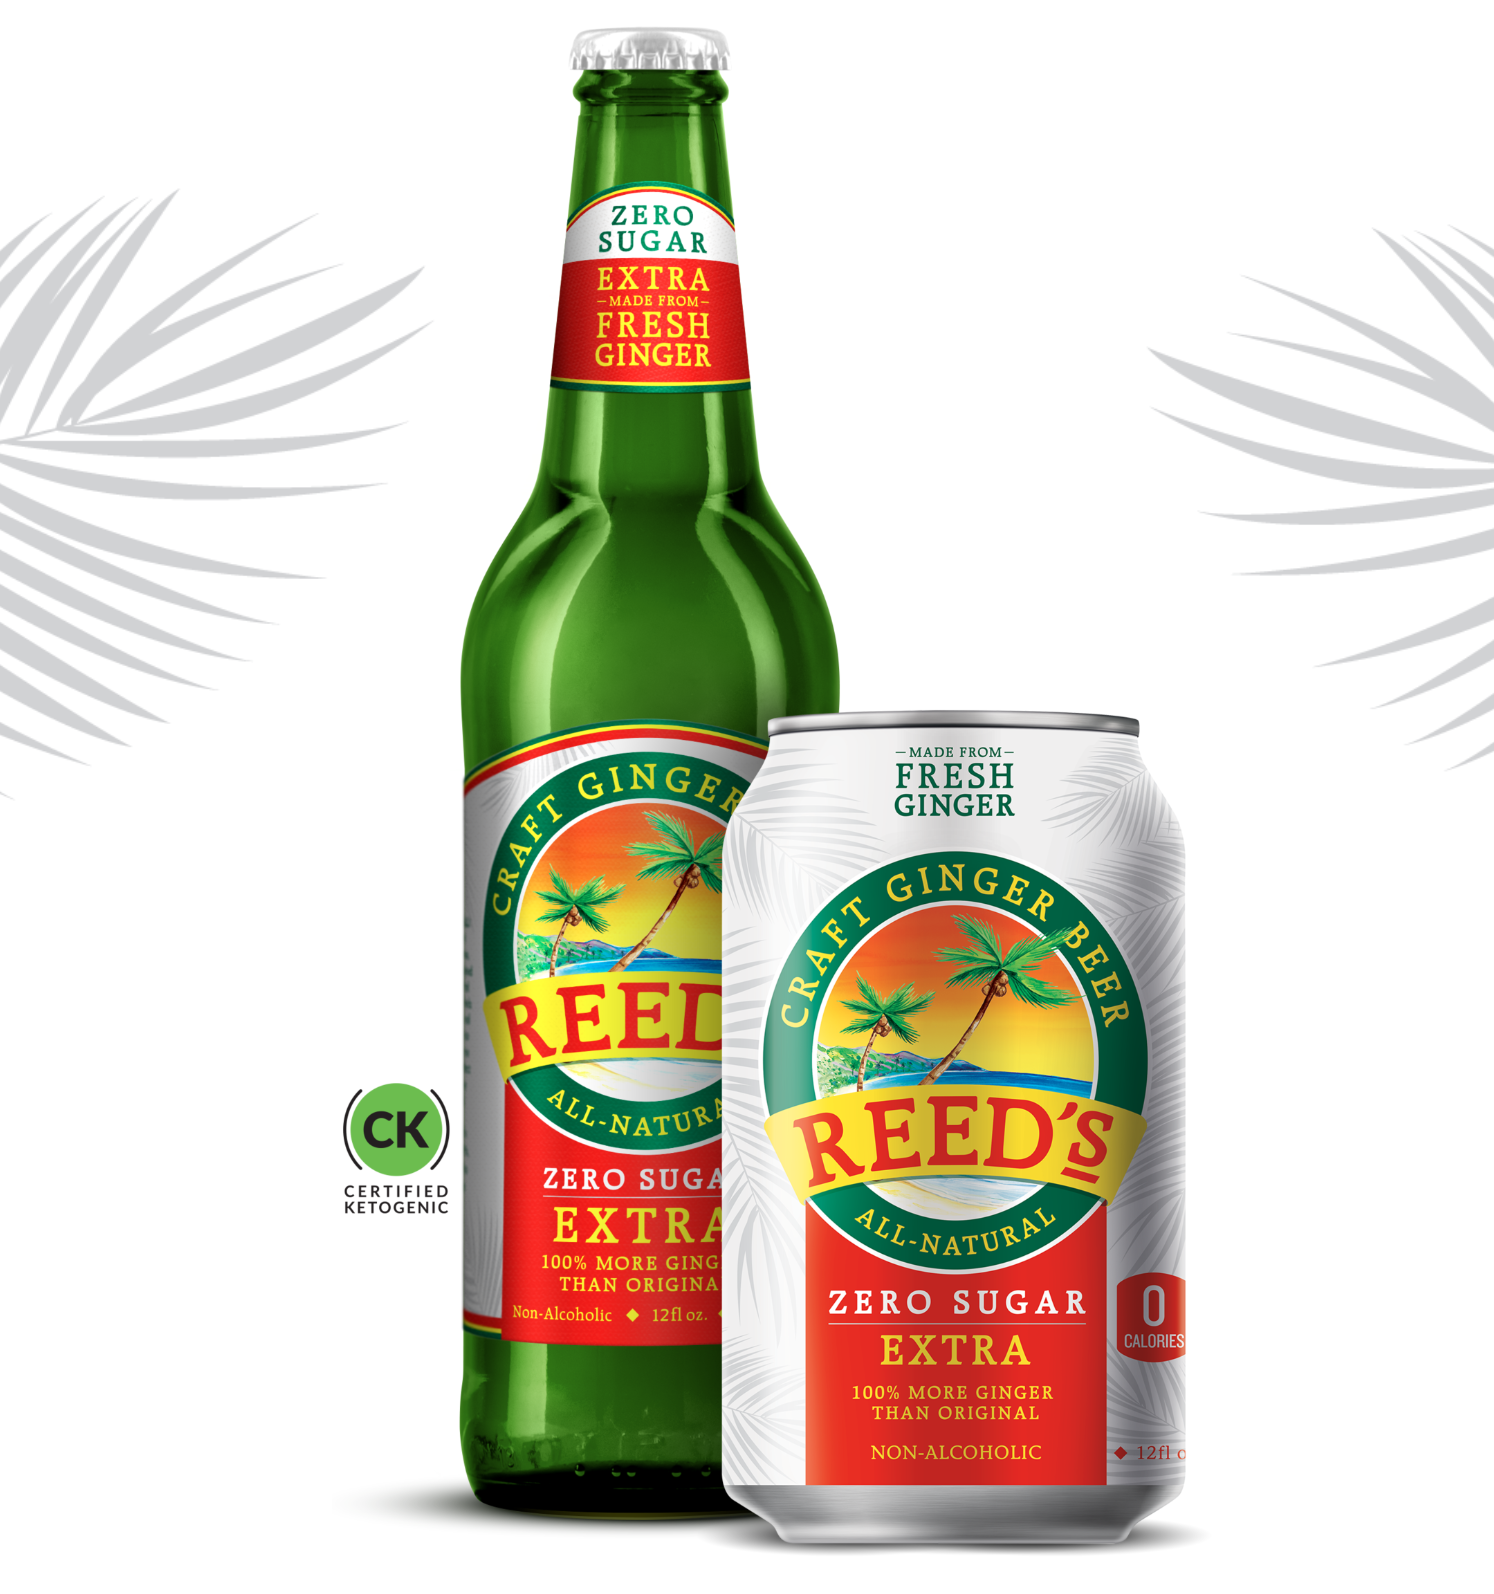 Reed's Zero Sugar EXTRA Ginger Beer